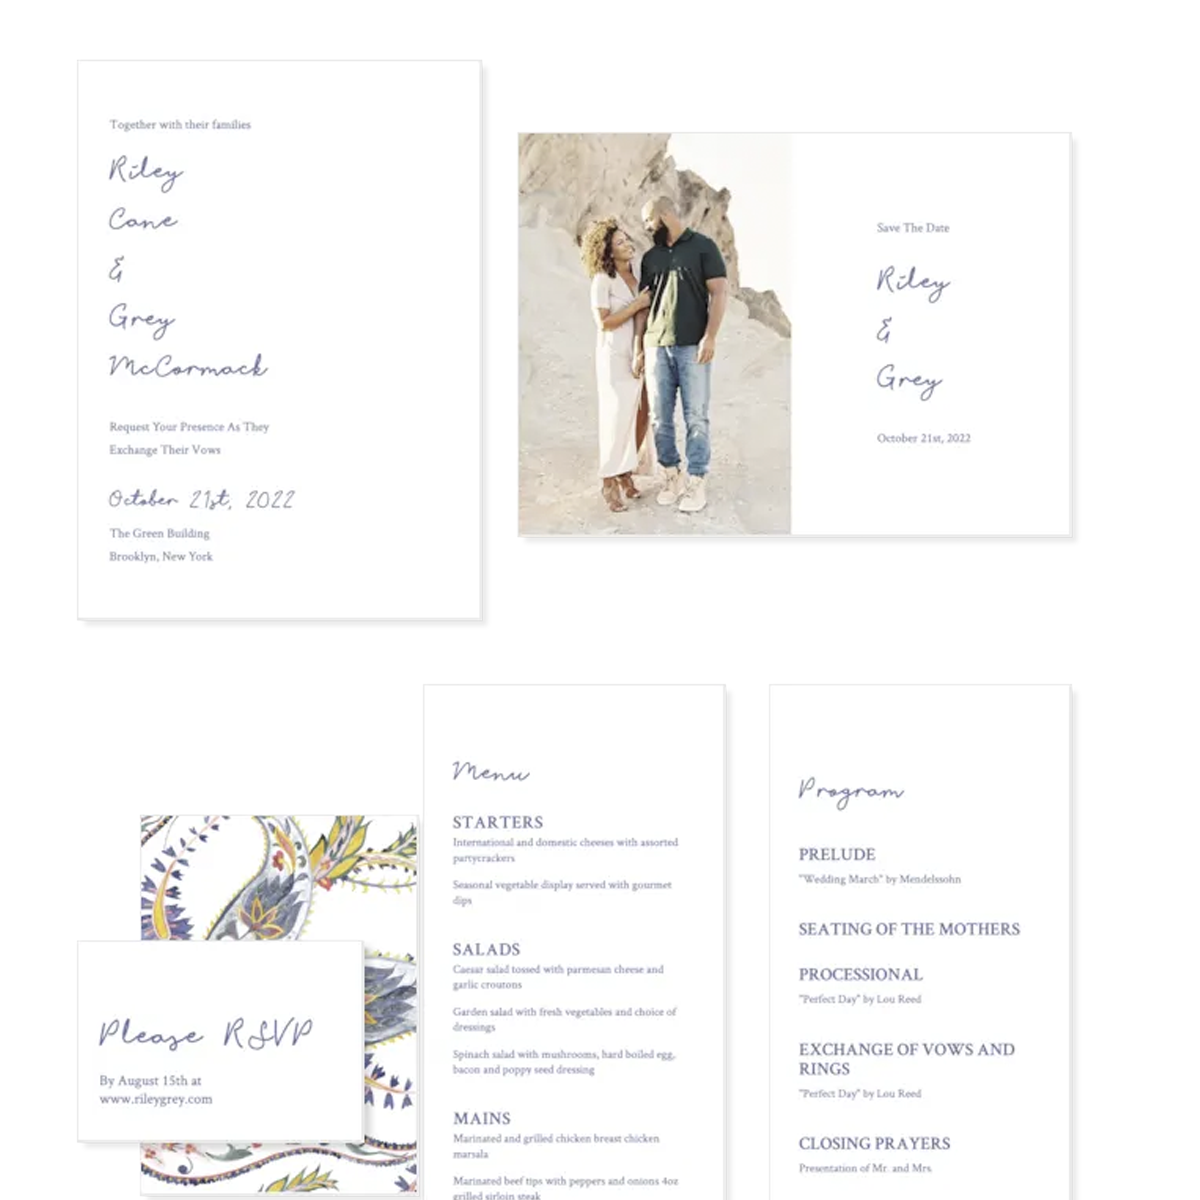 Riley & Grey Wedding Websites with matching paper